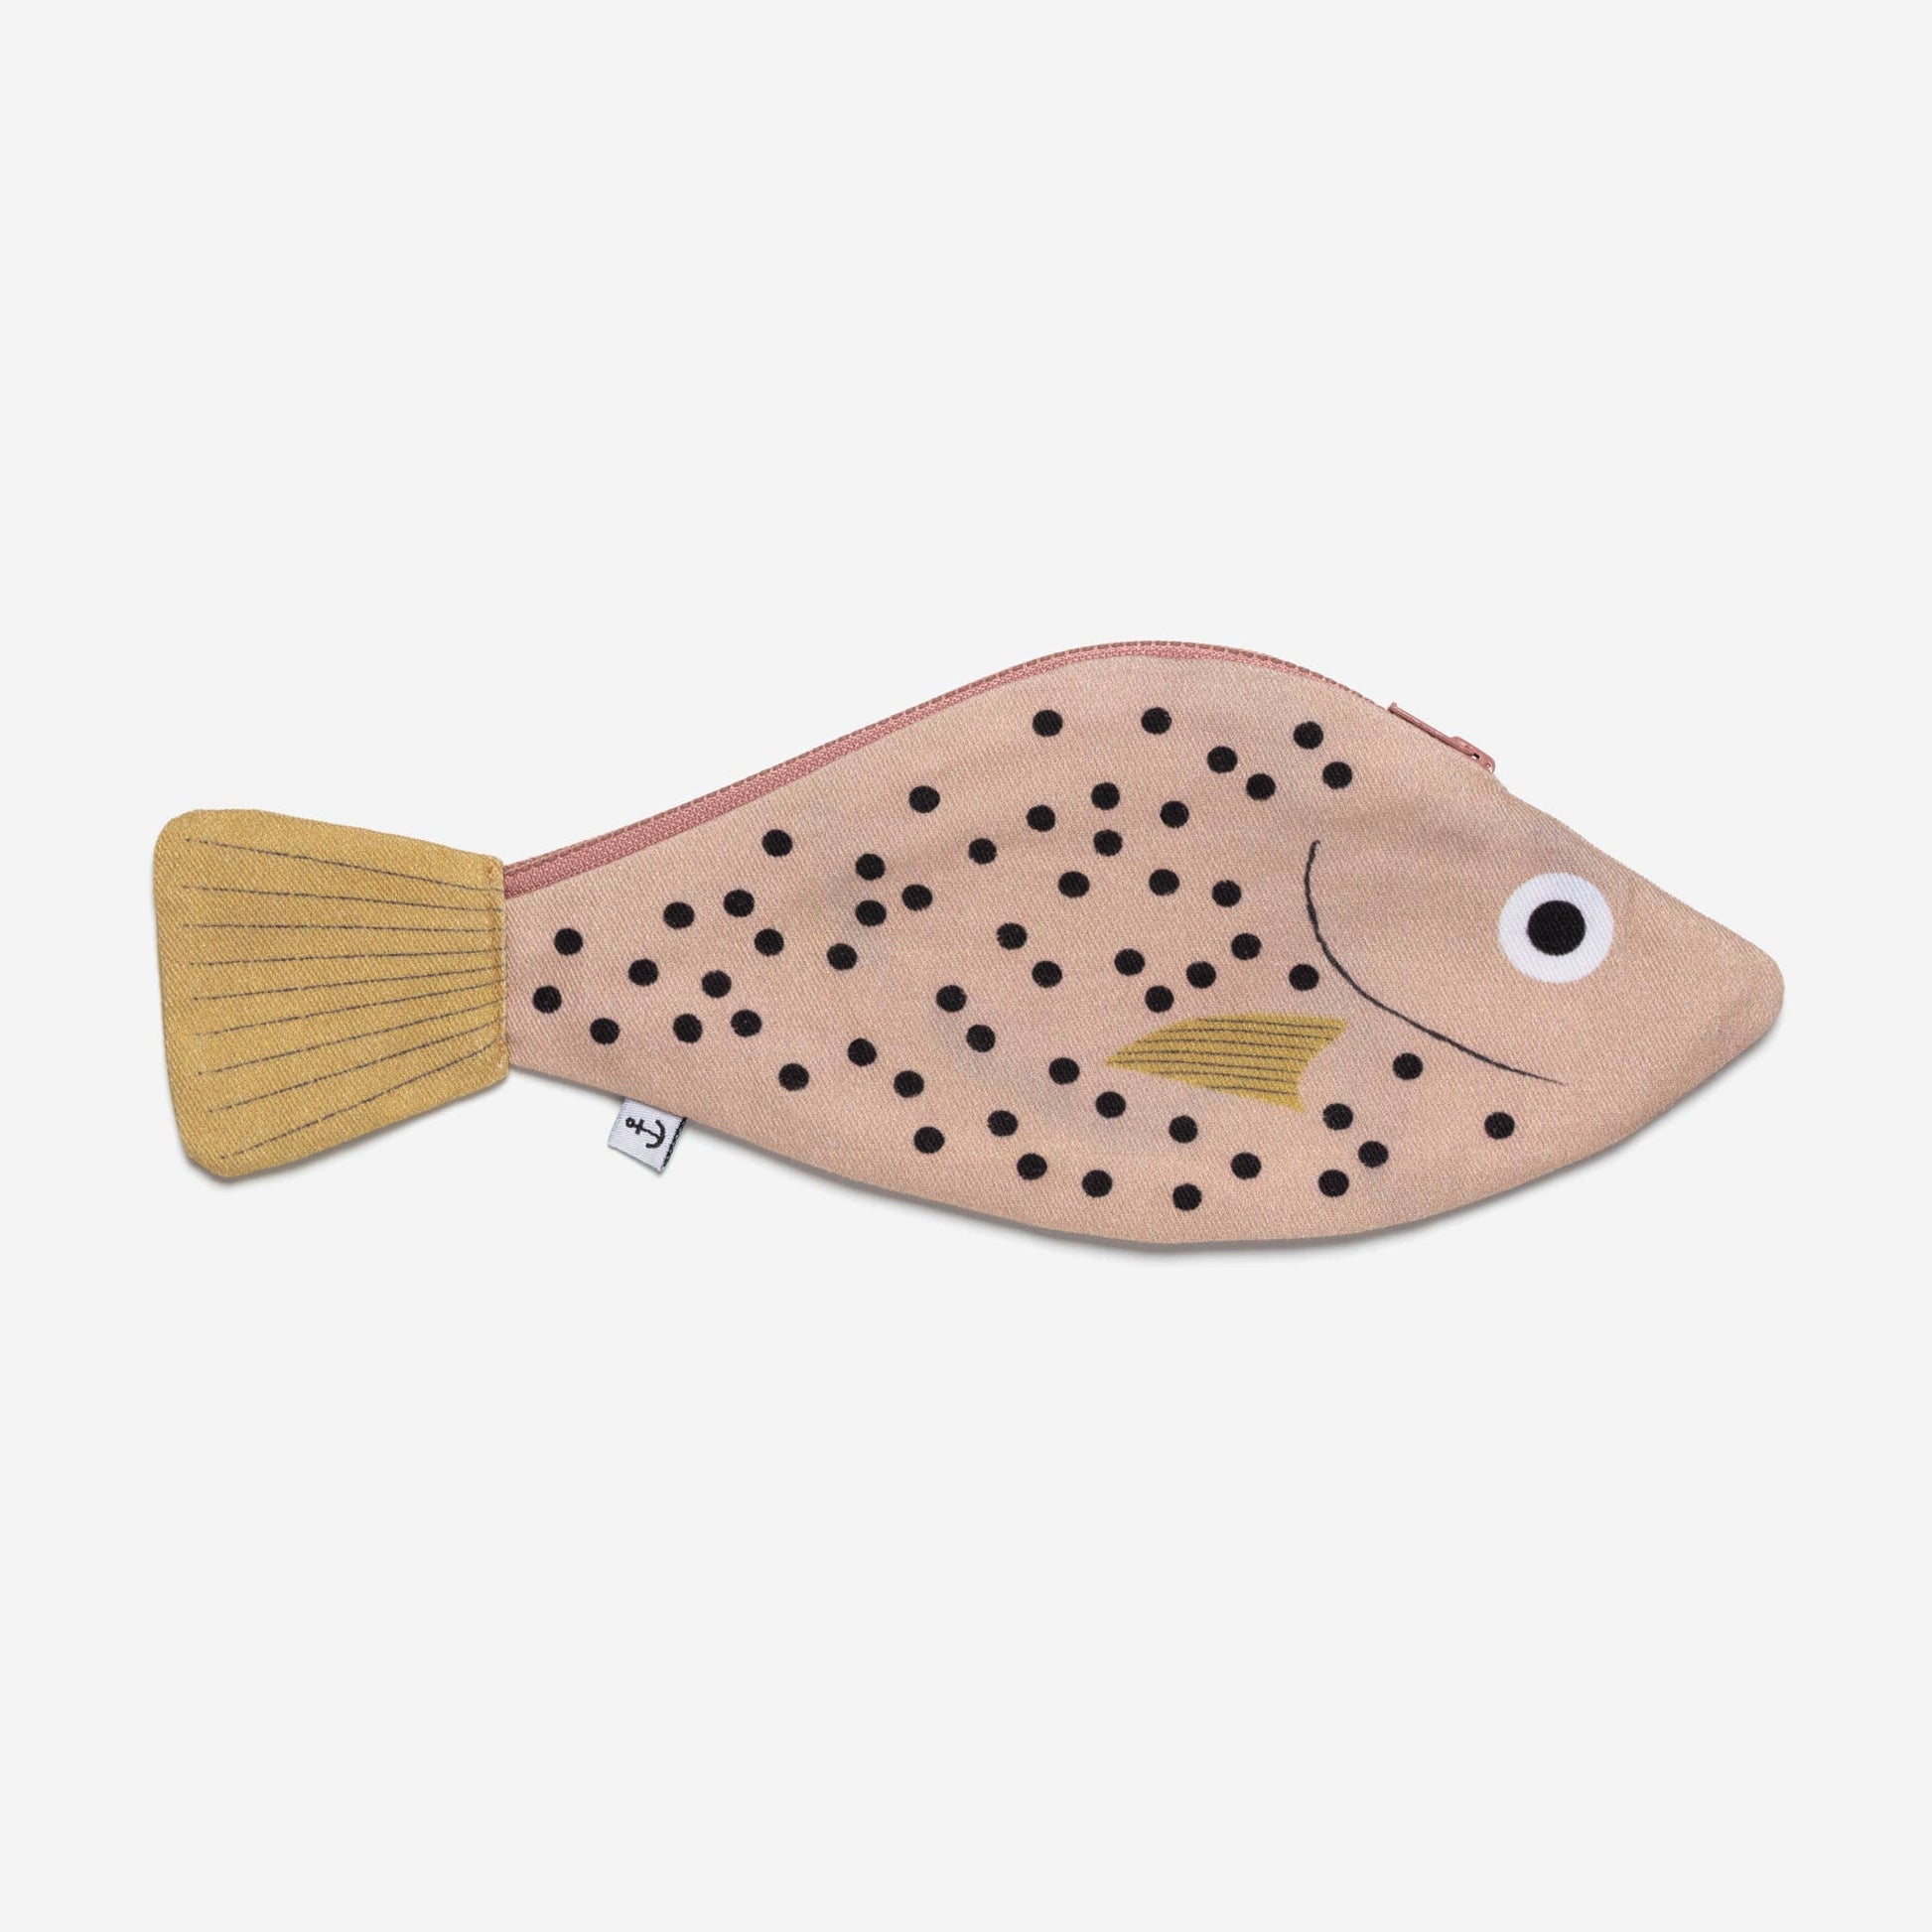 Redfish zippered pouch -- body is a light red with black dots, fins are yellow with stripes 